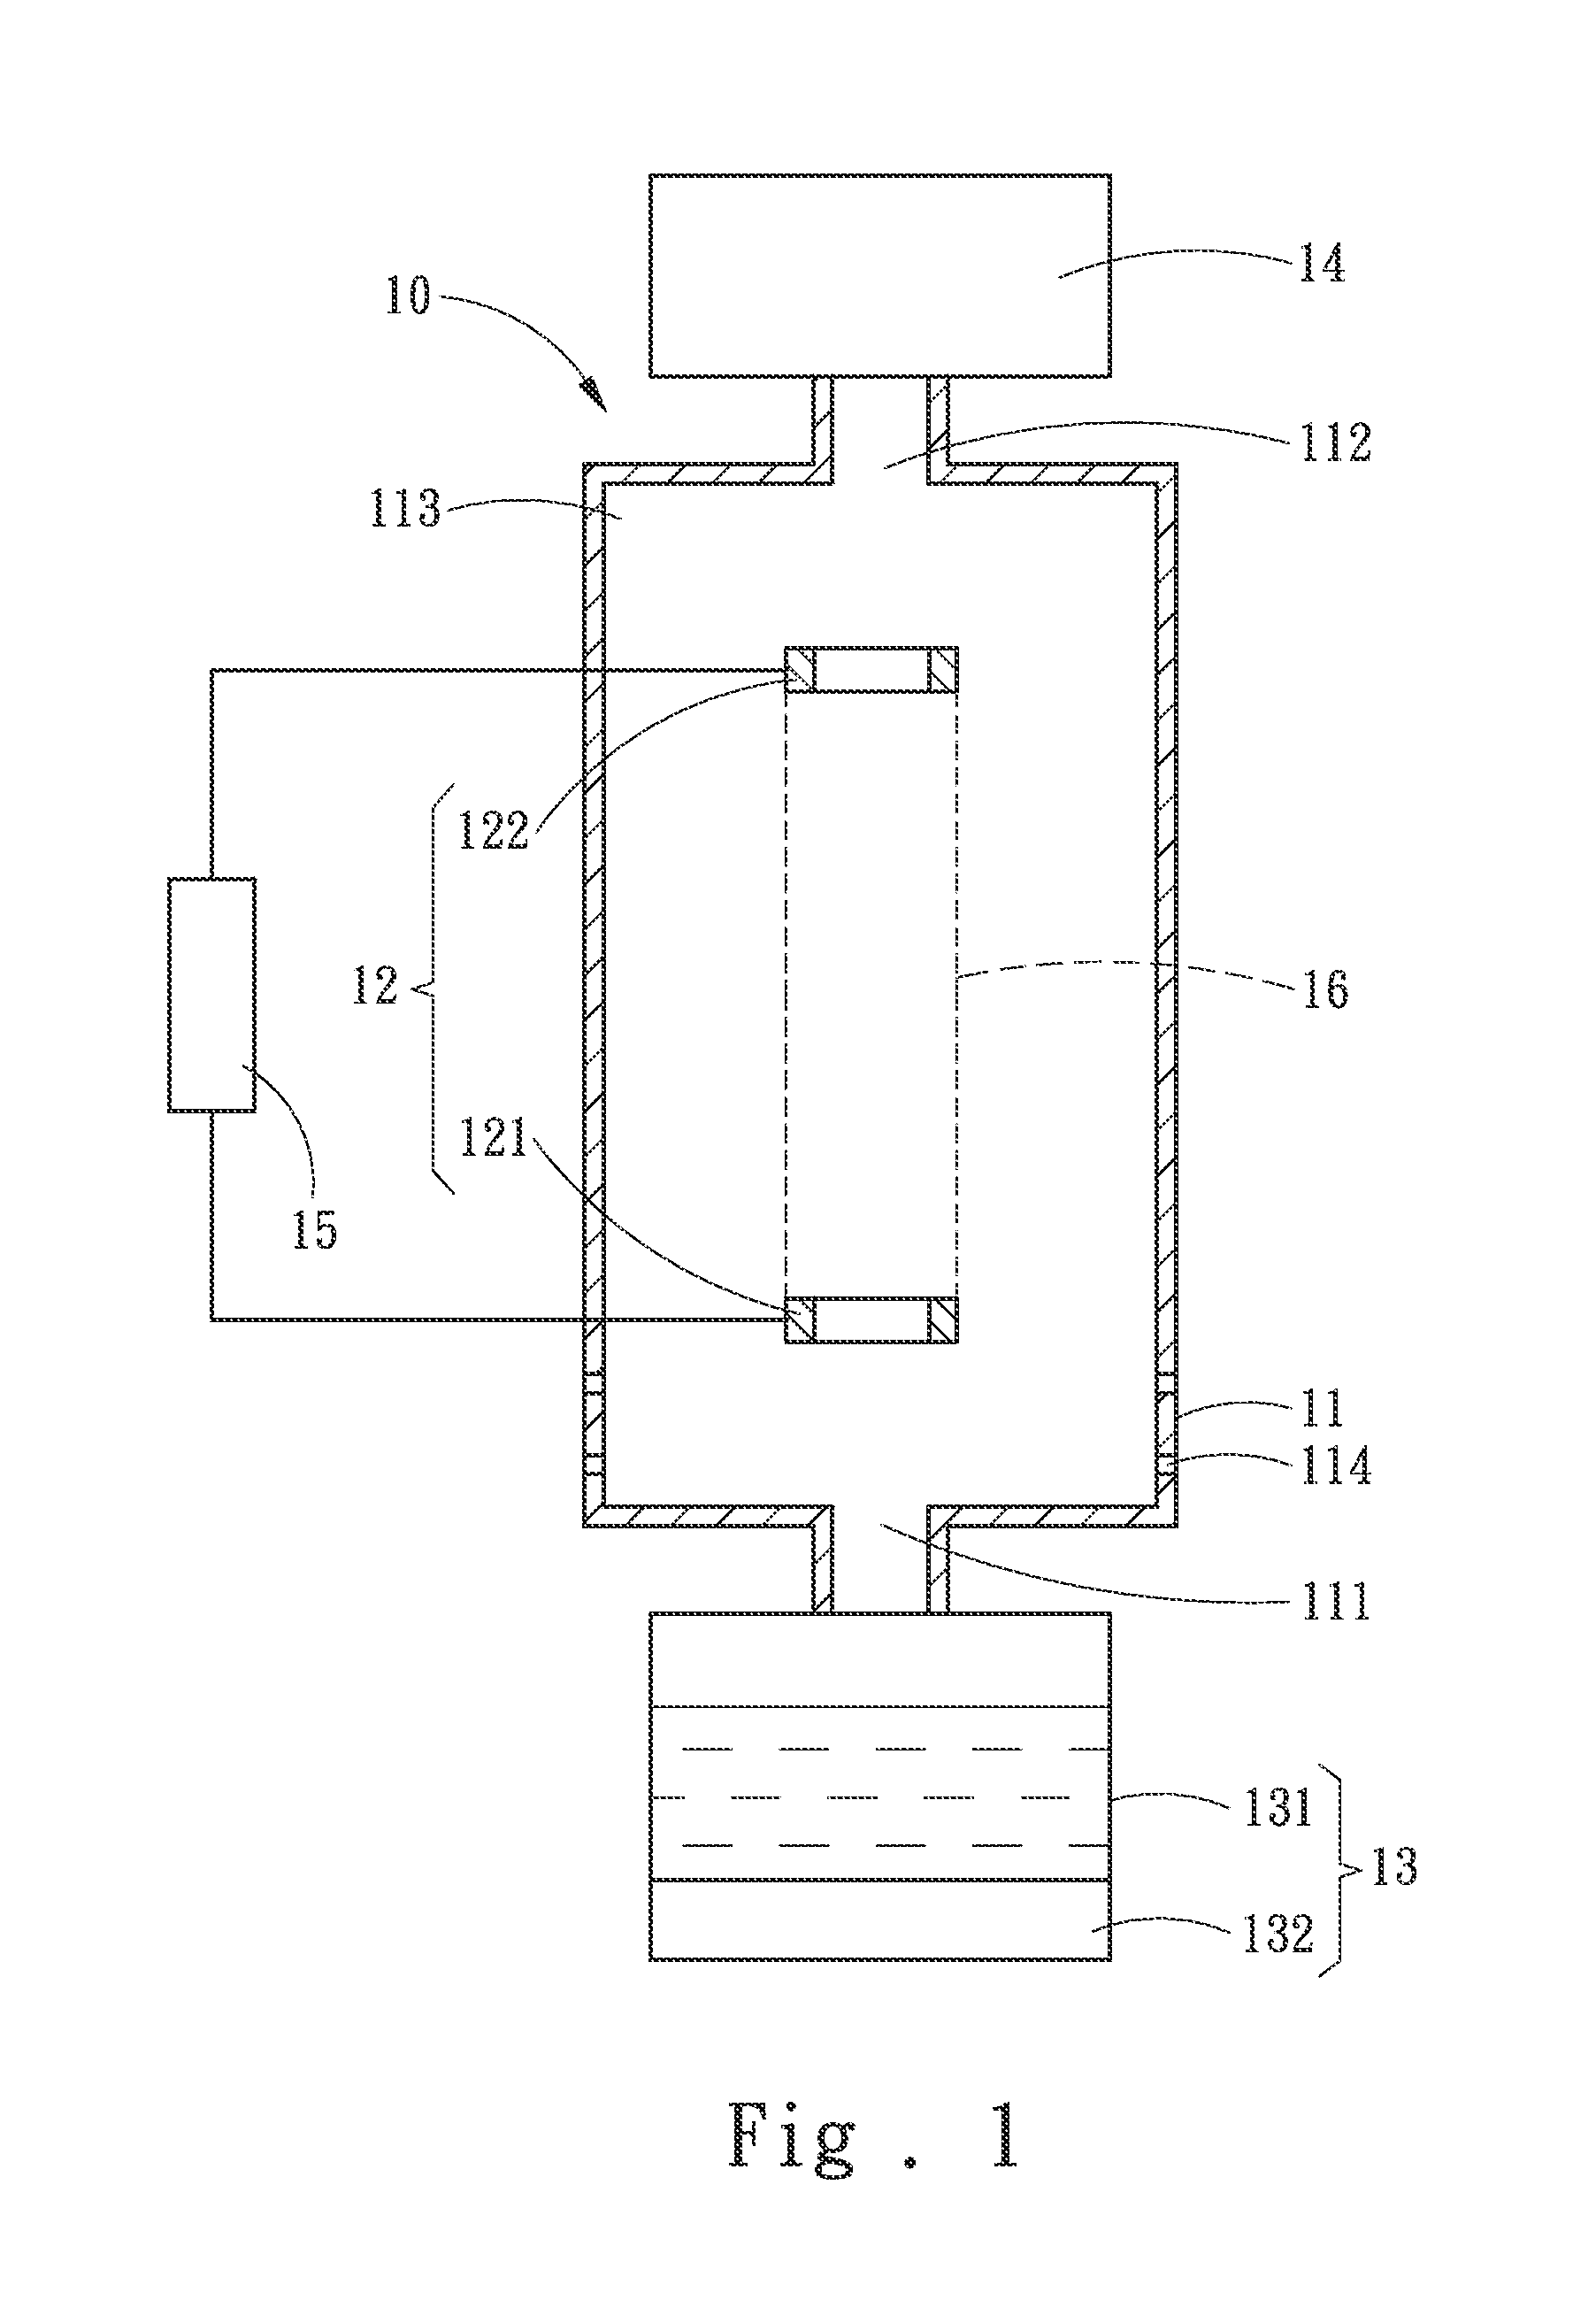 Module applying hydrogen generting device for supporting combustion of internal combustion engine